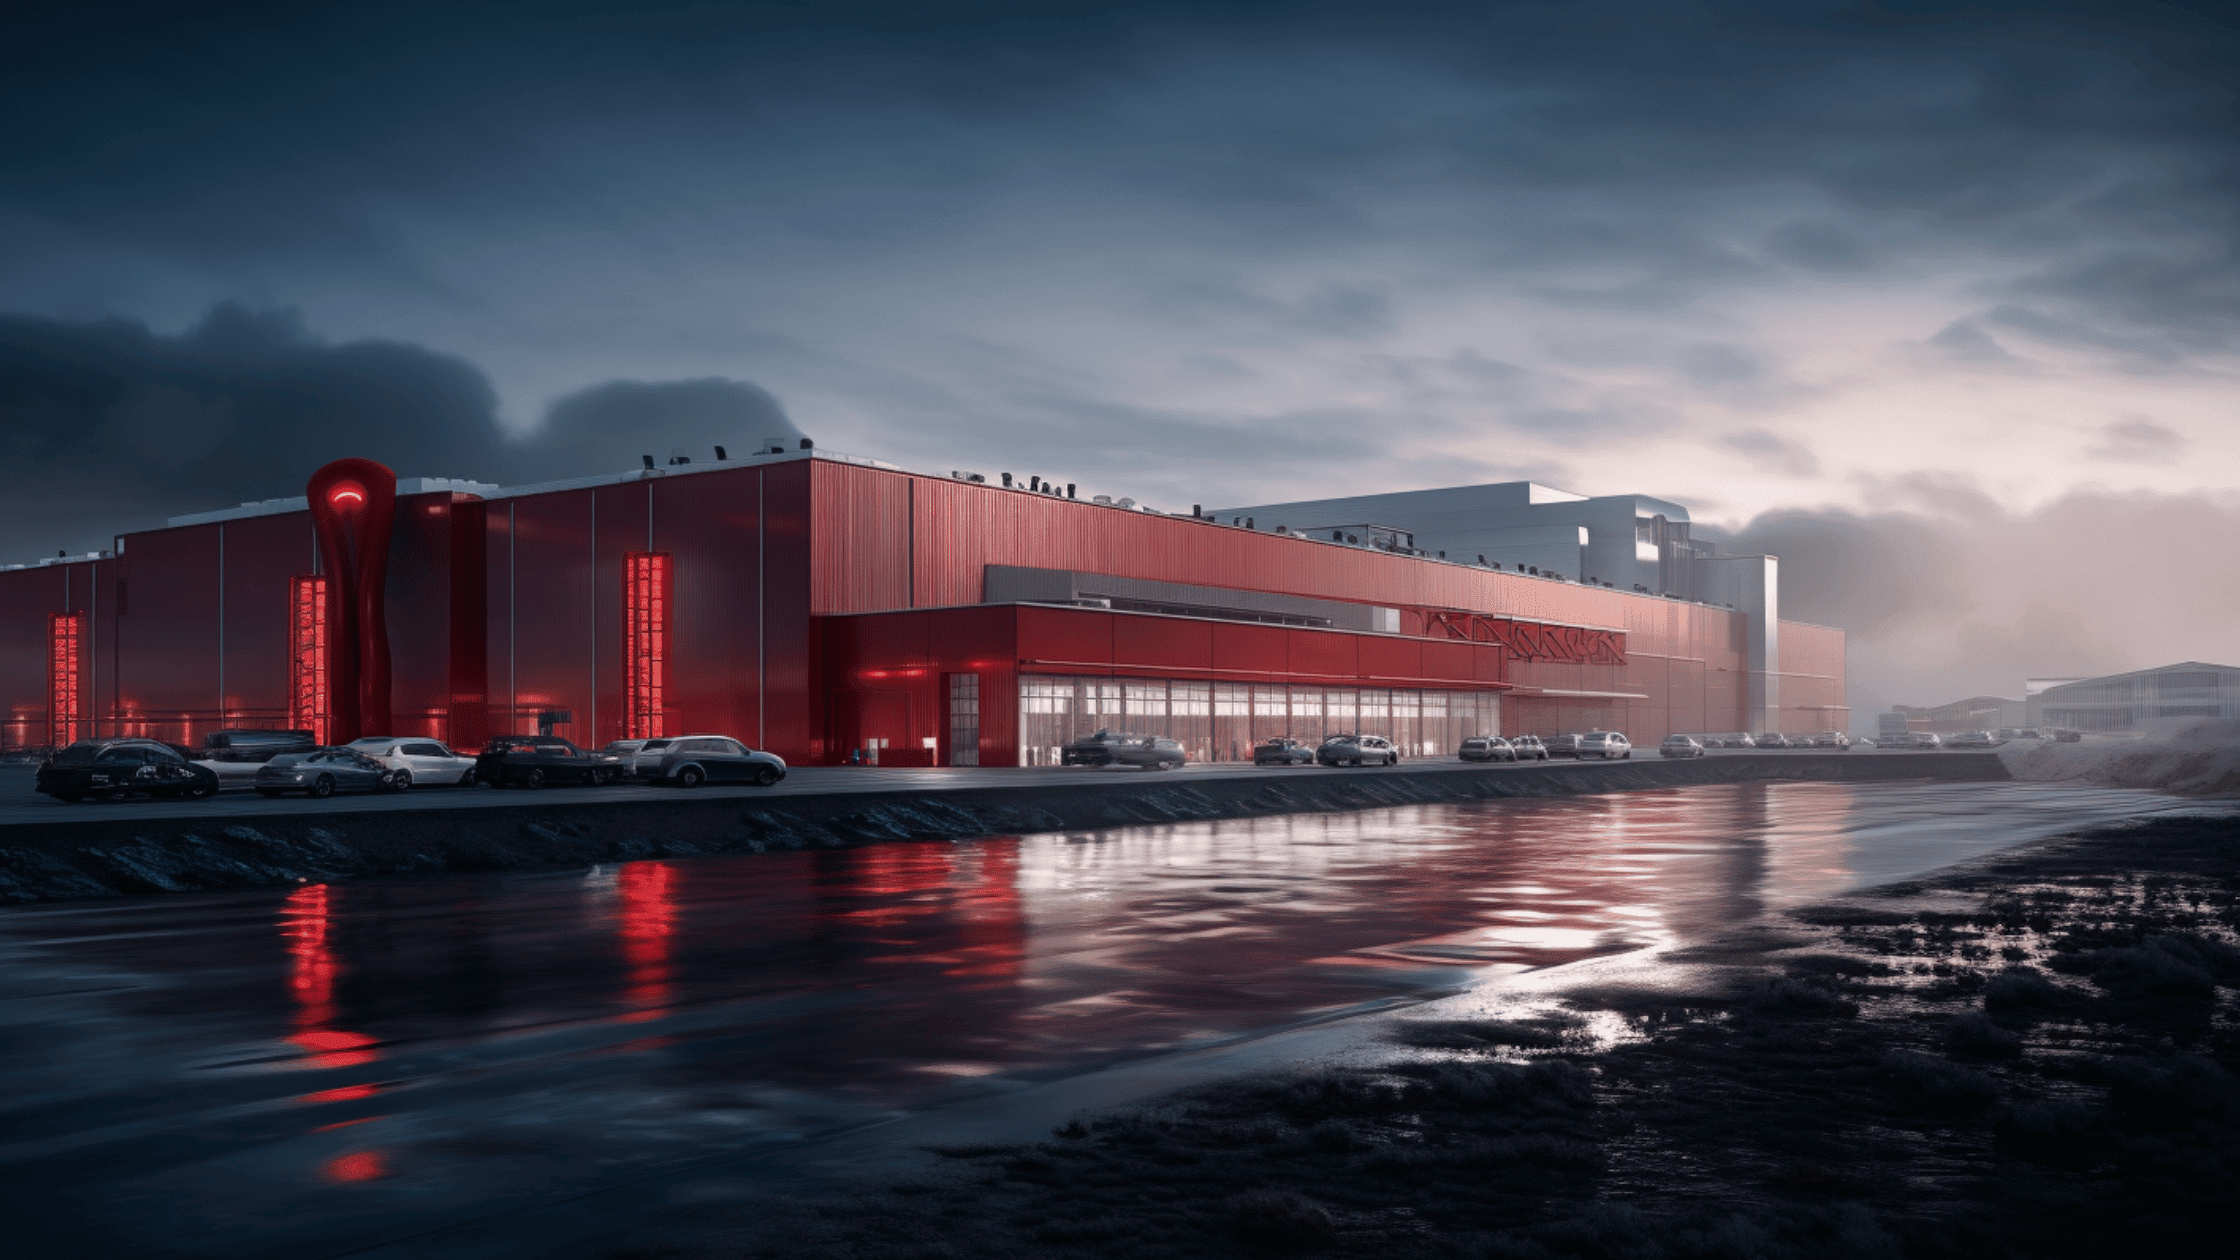 Artist Impression of a Tesla Giga Factory by Night